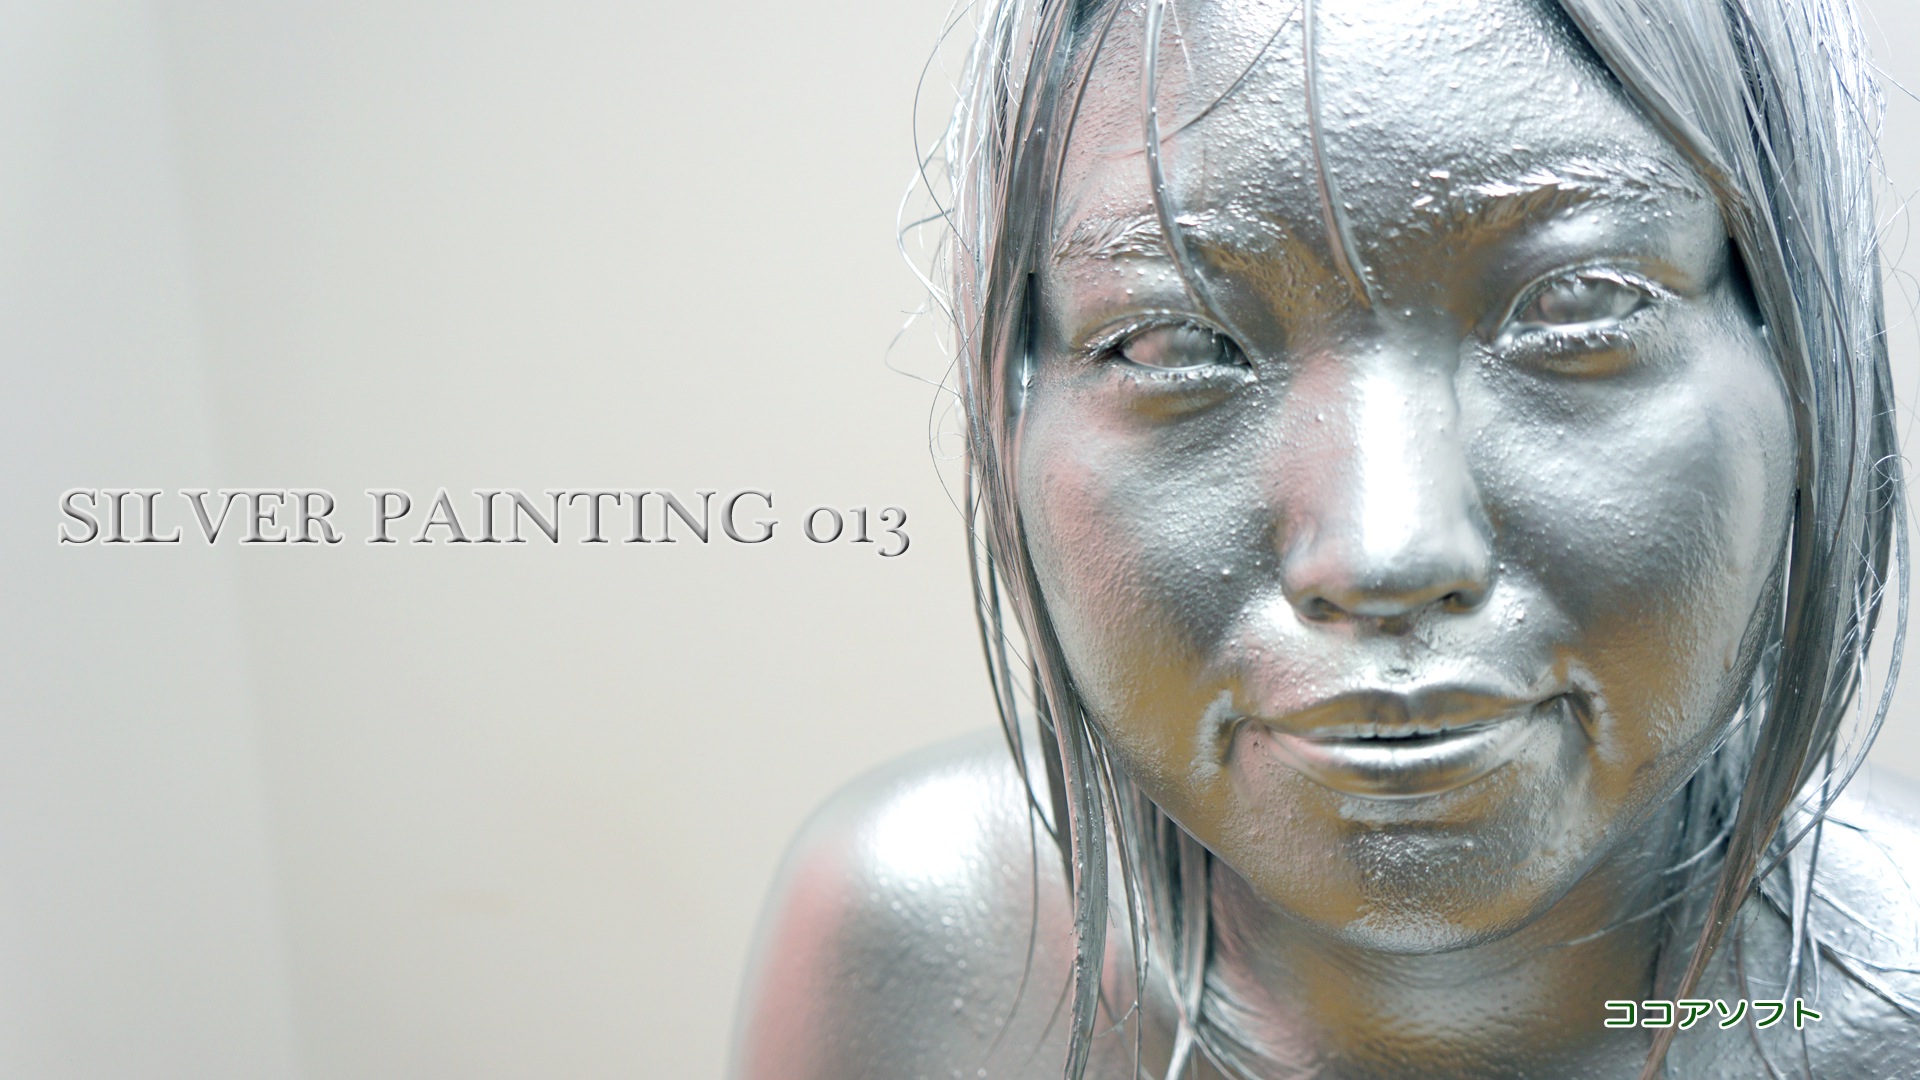 SILVER PAINTING 013